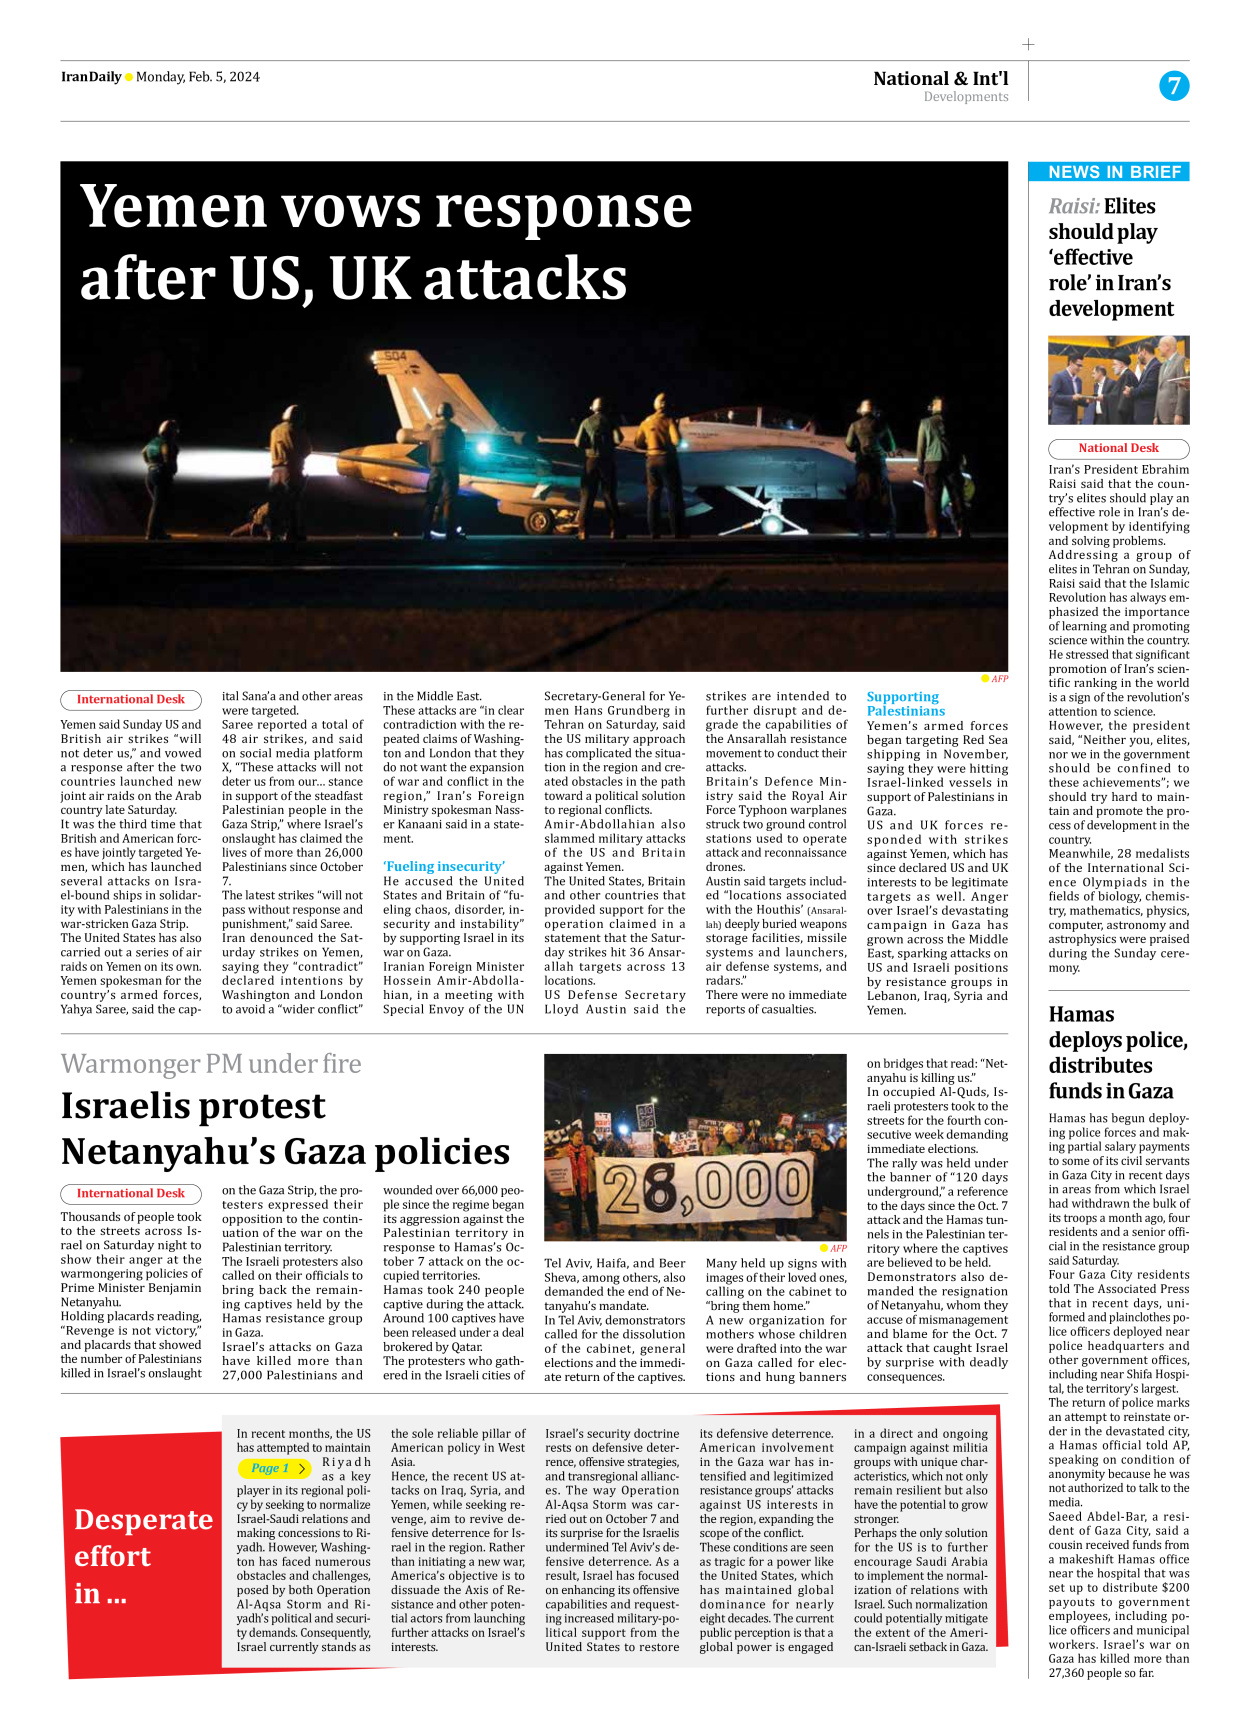 Iran Daily - Number Seven Thousand Five Hundred and Two - 05 February 2024 - Page 7